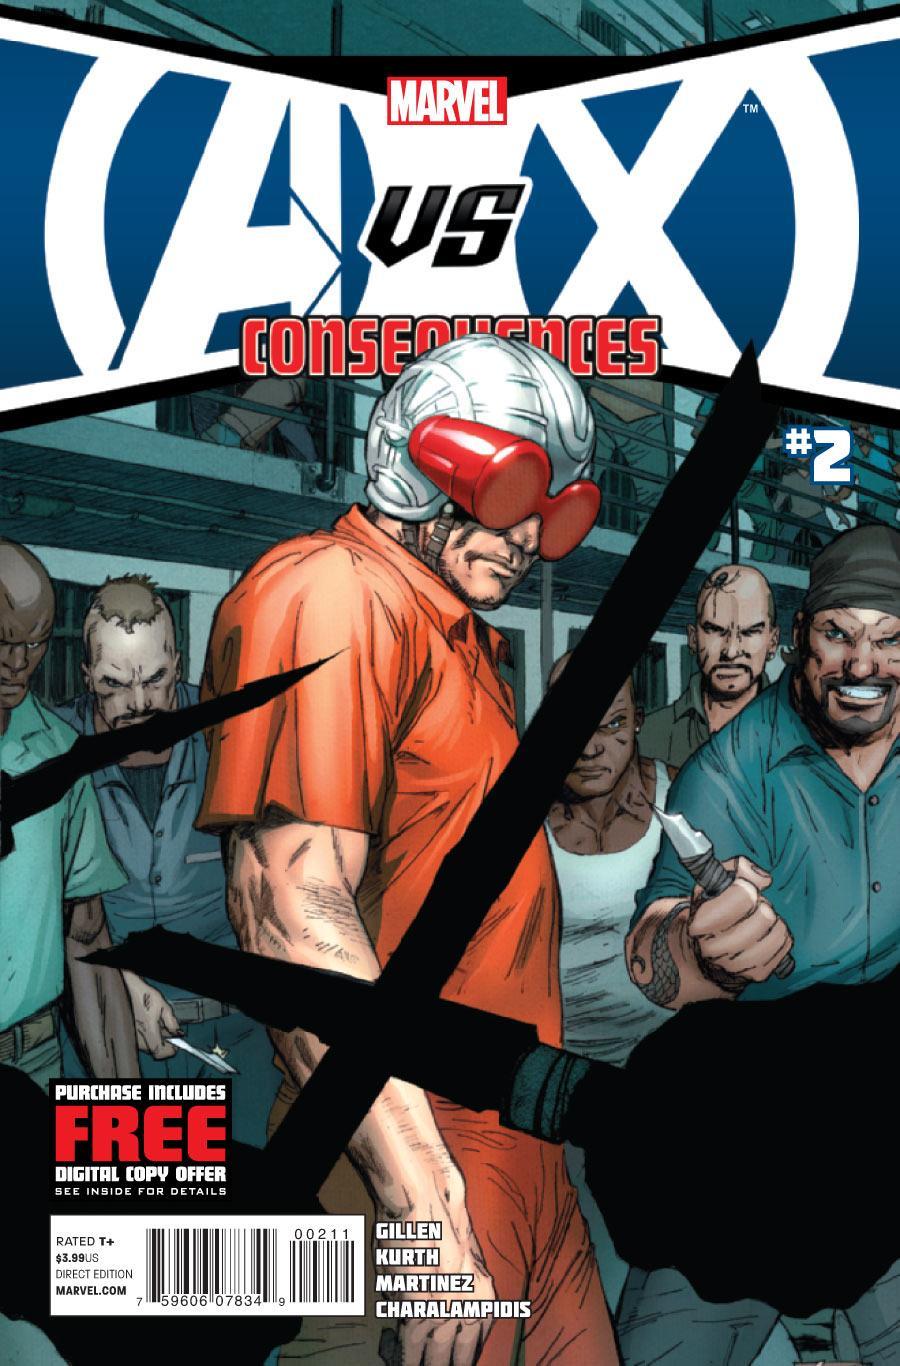 AvX: Consequences Vol. 1 #2